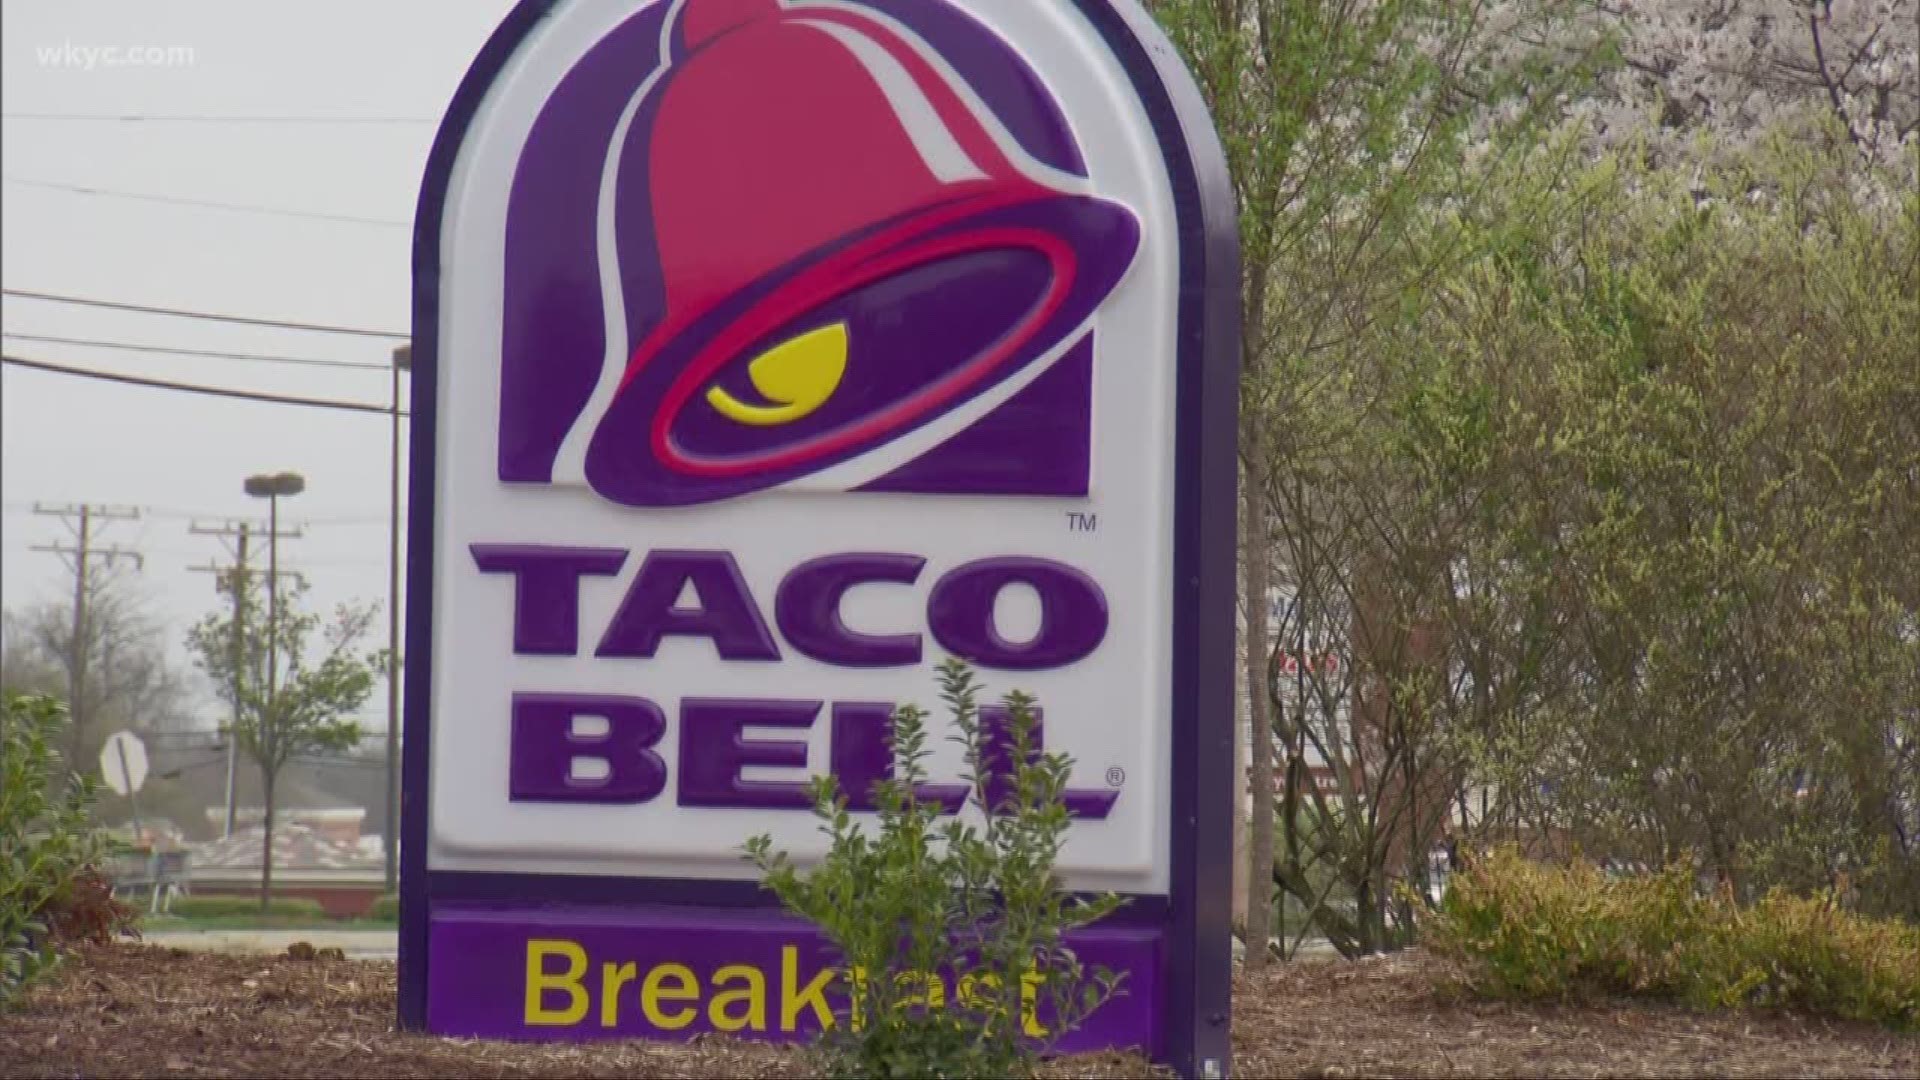 April 4, 2019: Taco Bell is testing some new vegetarian menu options.